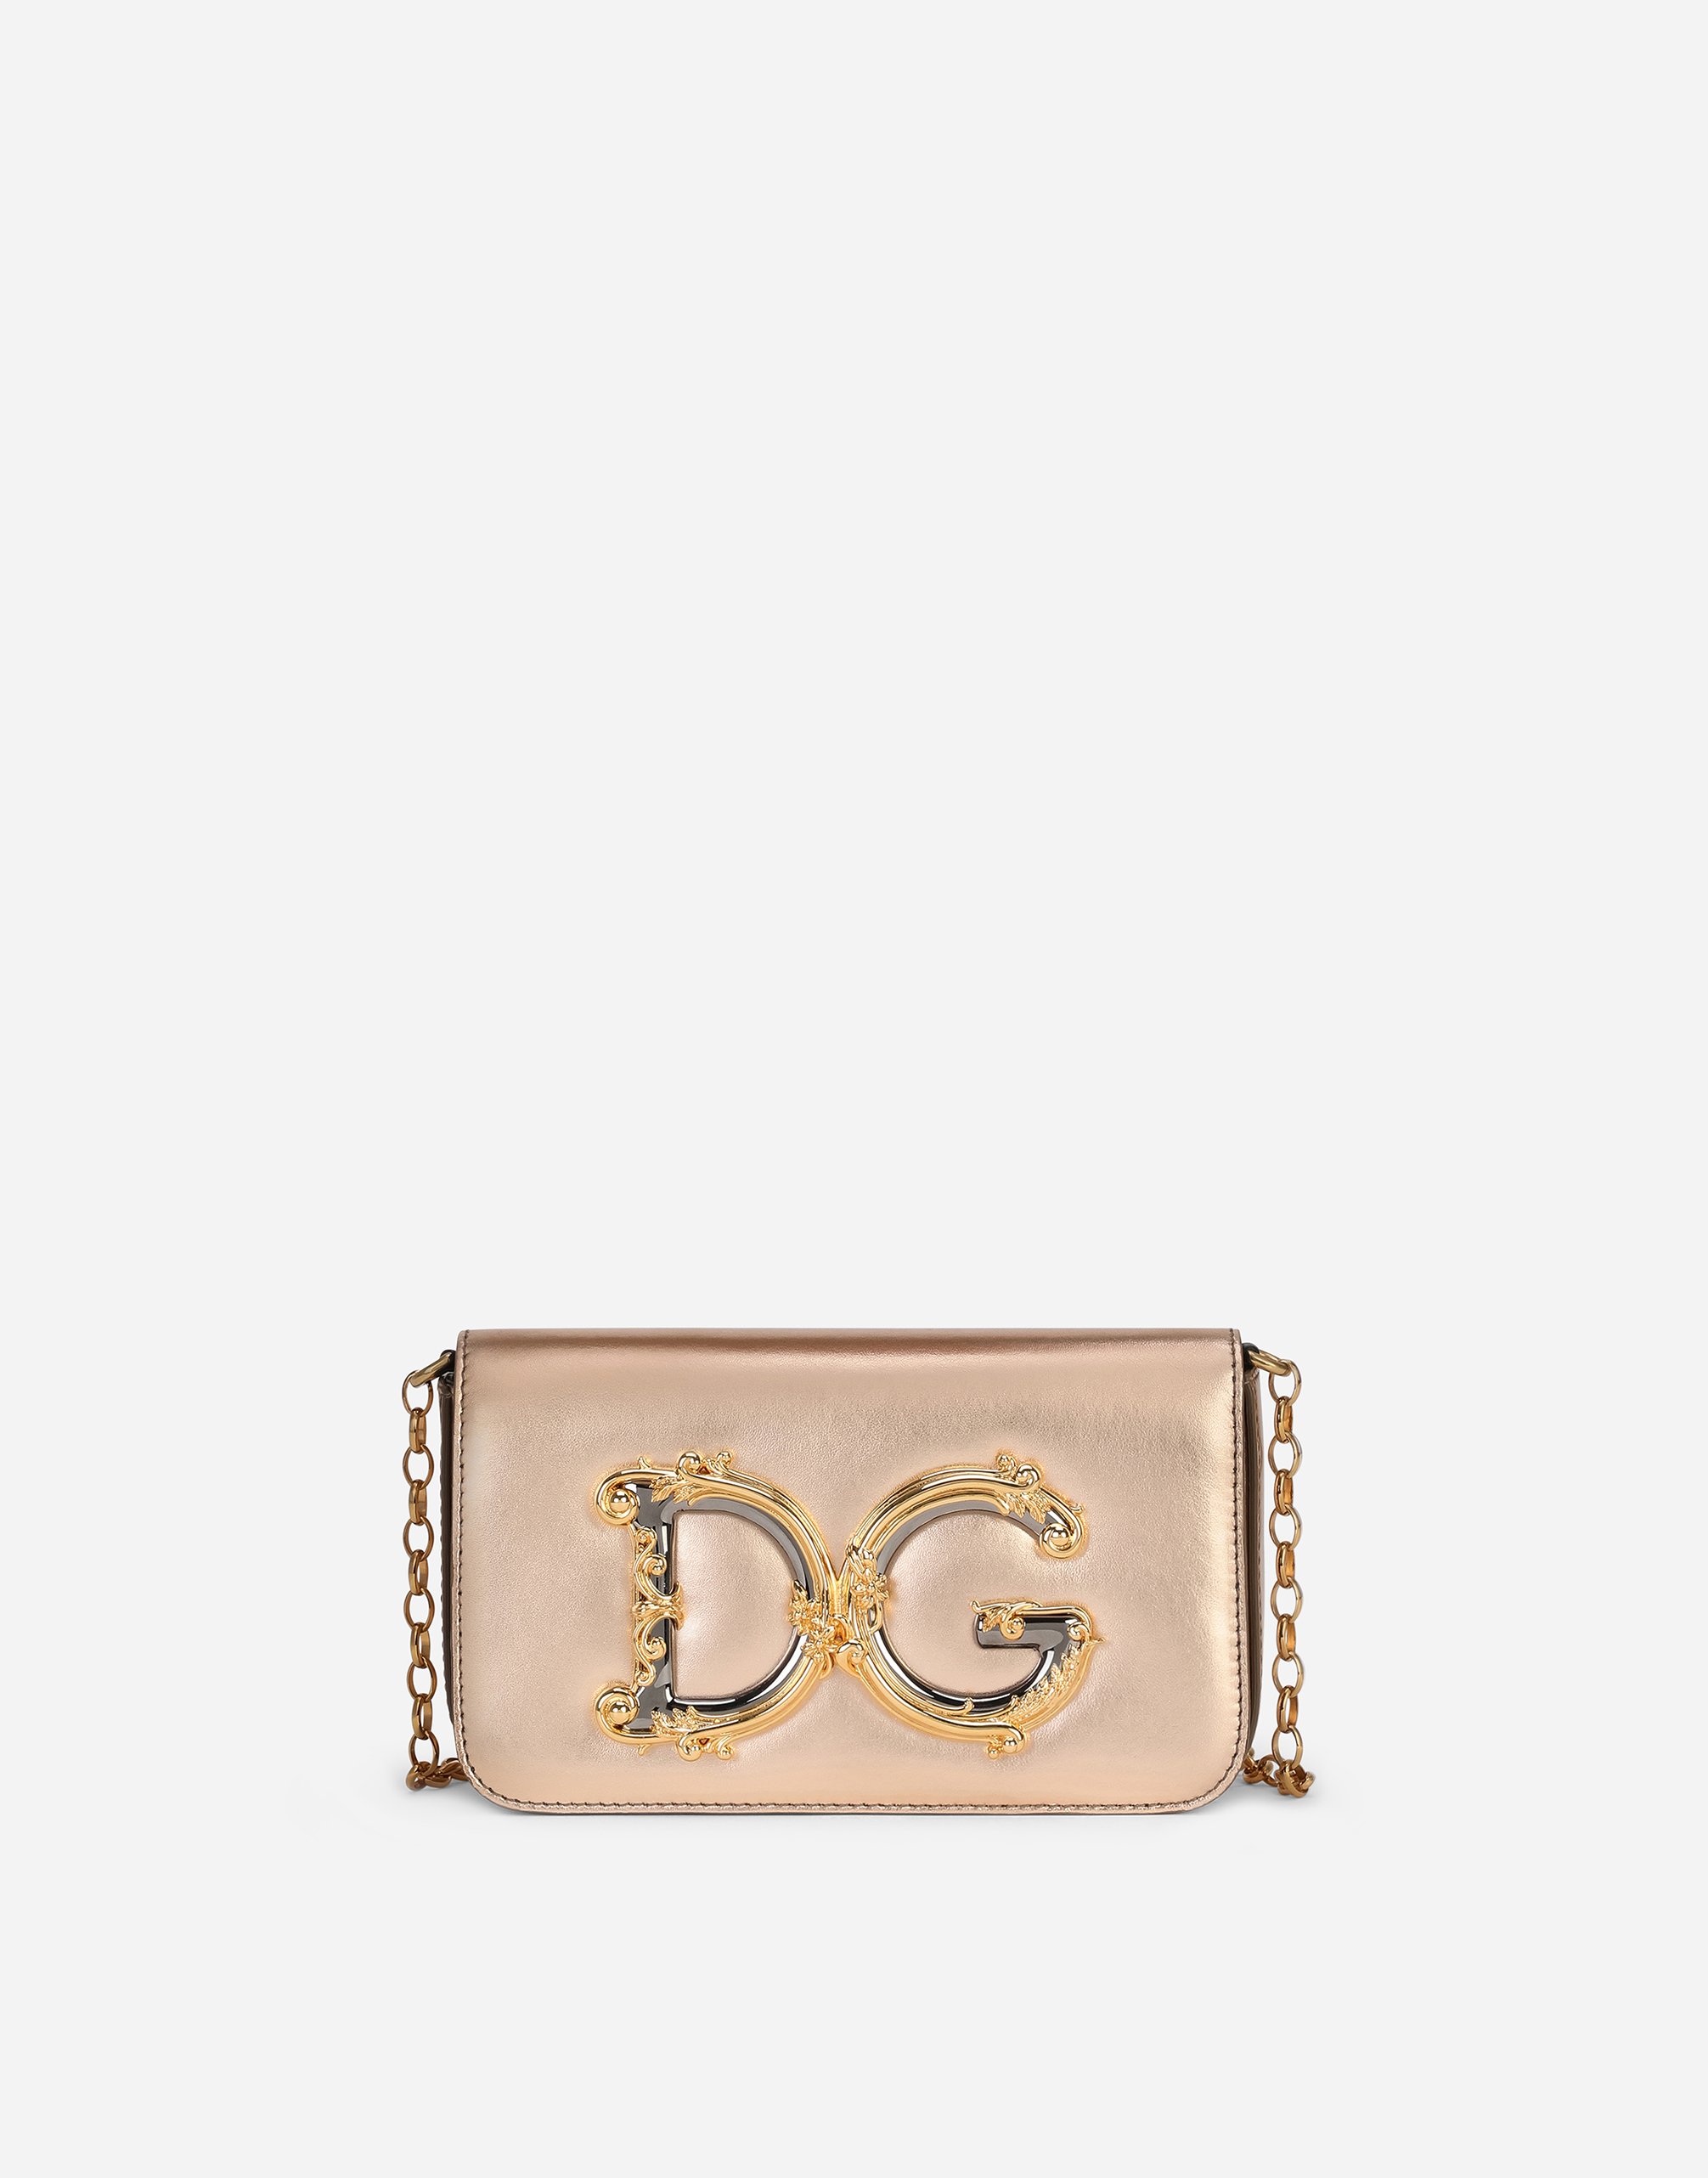 Nappa mordore leather DG Girls clutch in Gold